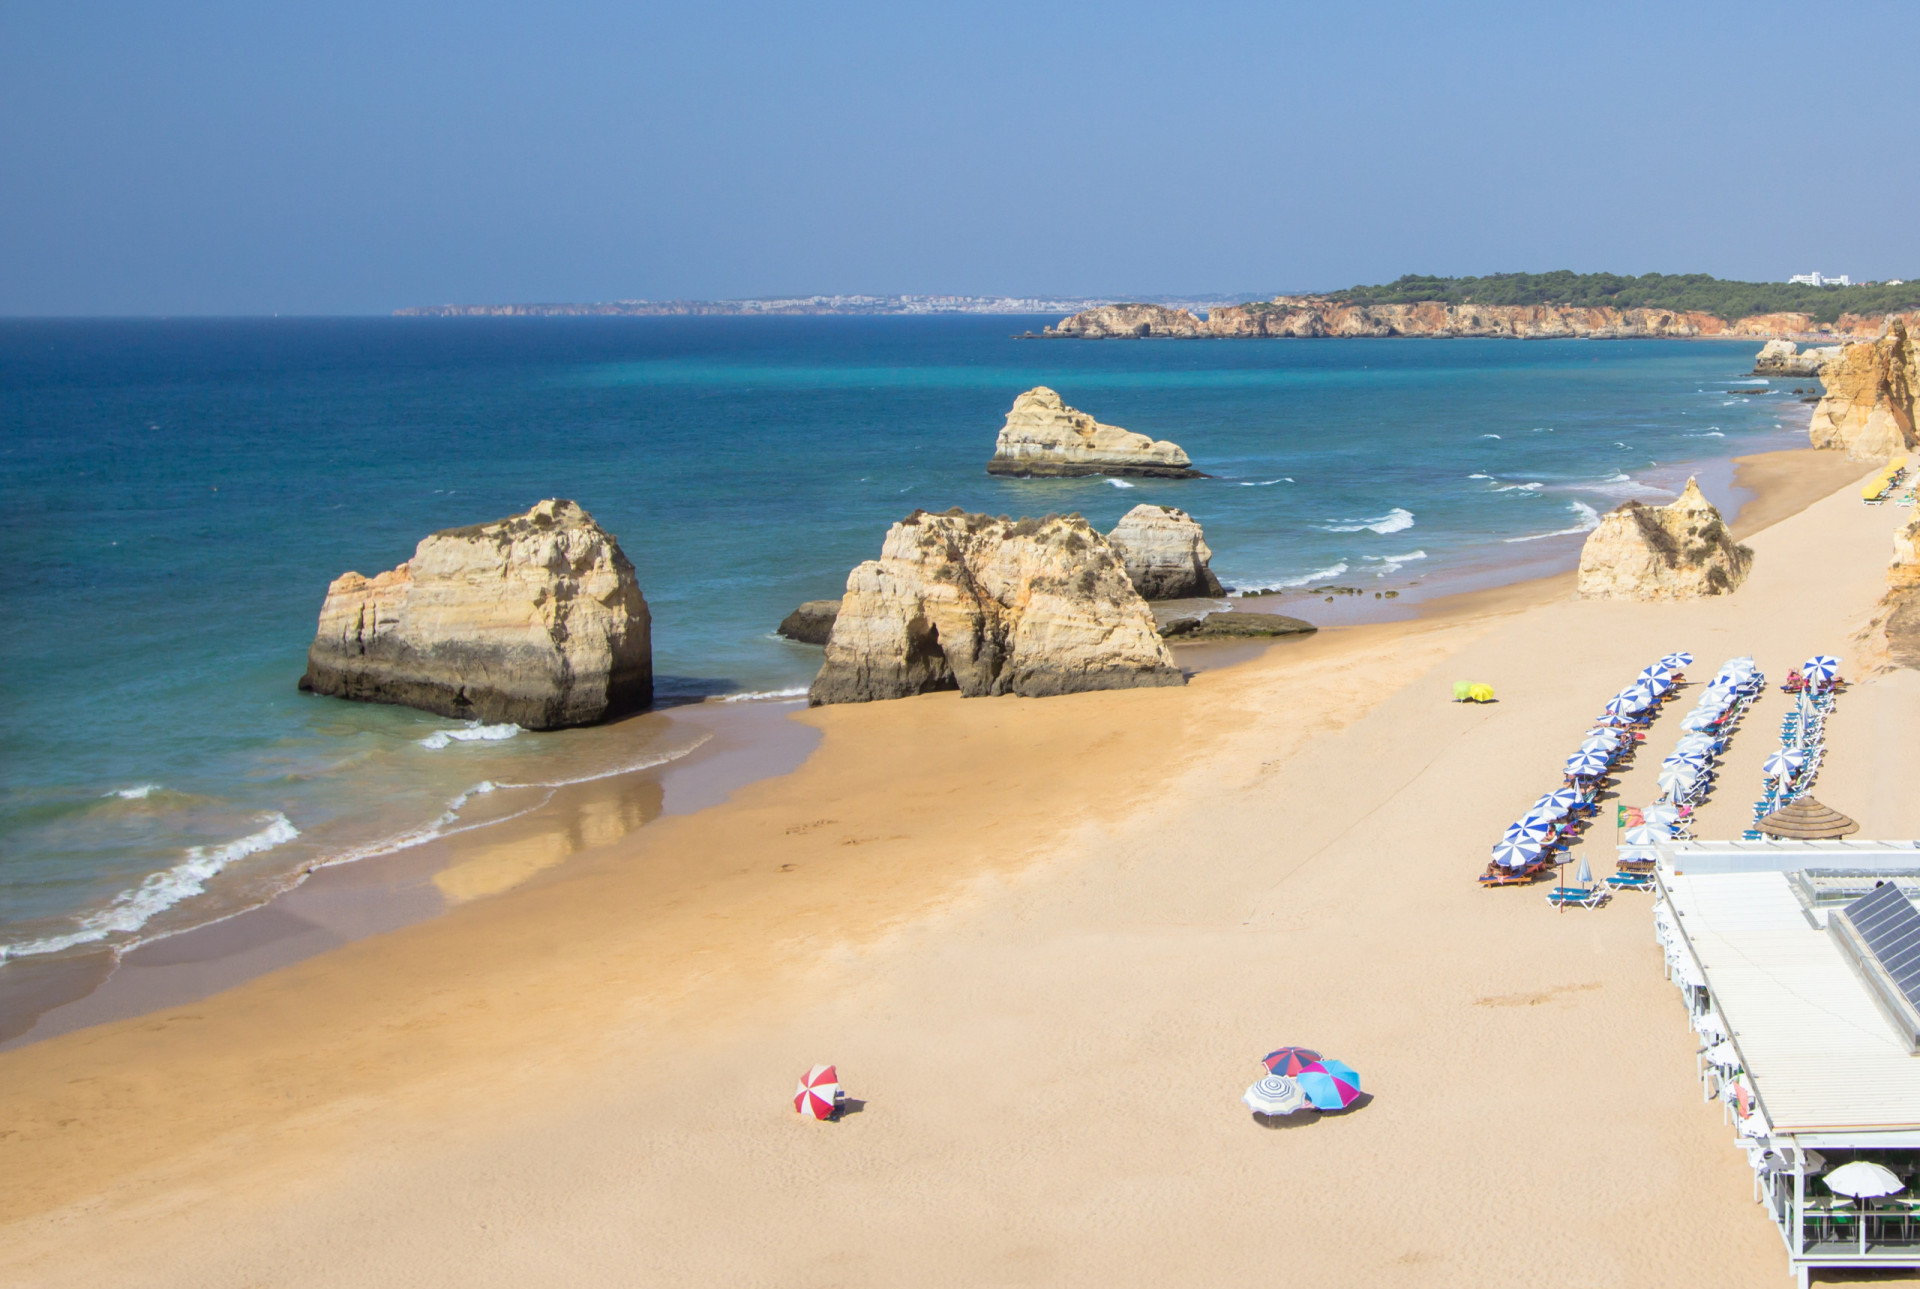 <p>Score: 4.018</p> <p>Located on Armona Island in the Algarve, this long, sandy beach is accessible by ferry or water taxi from the city of Olhão.</p>